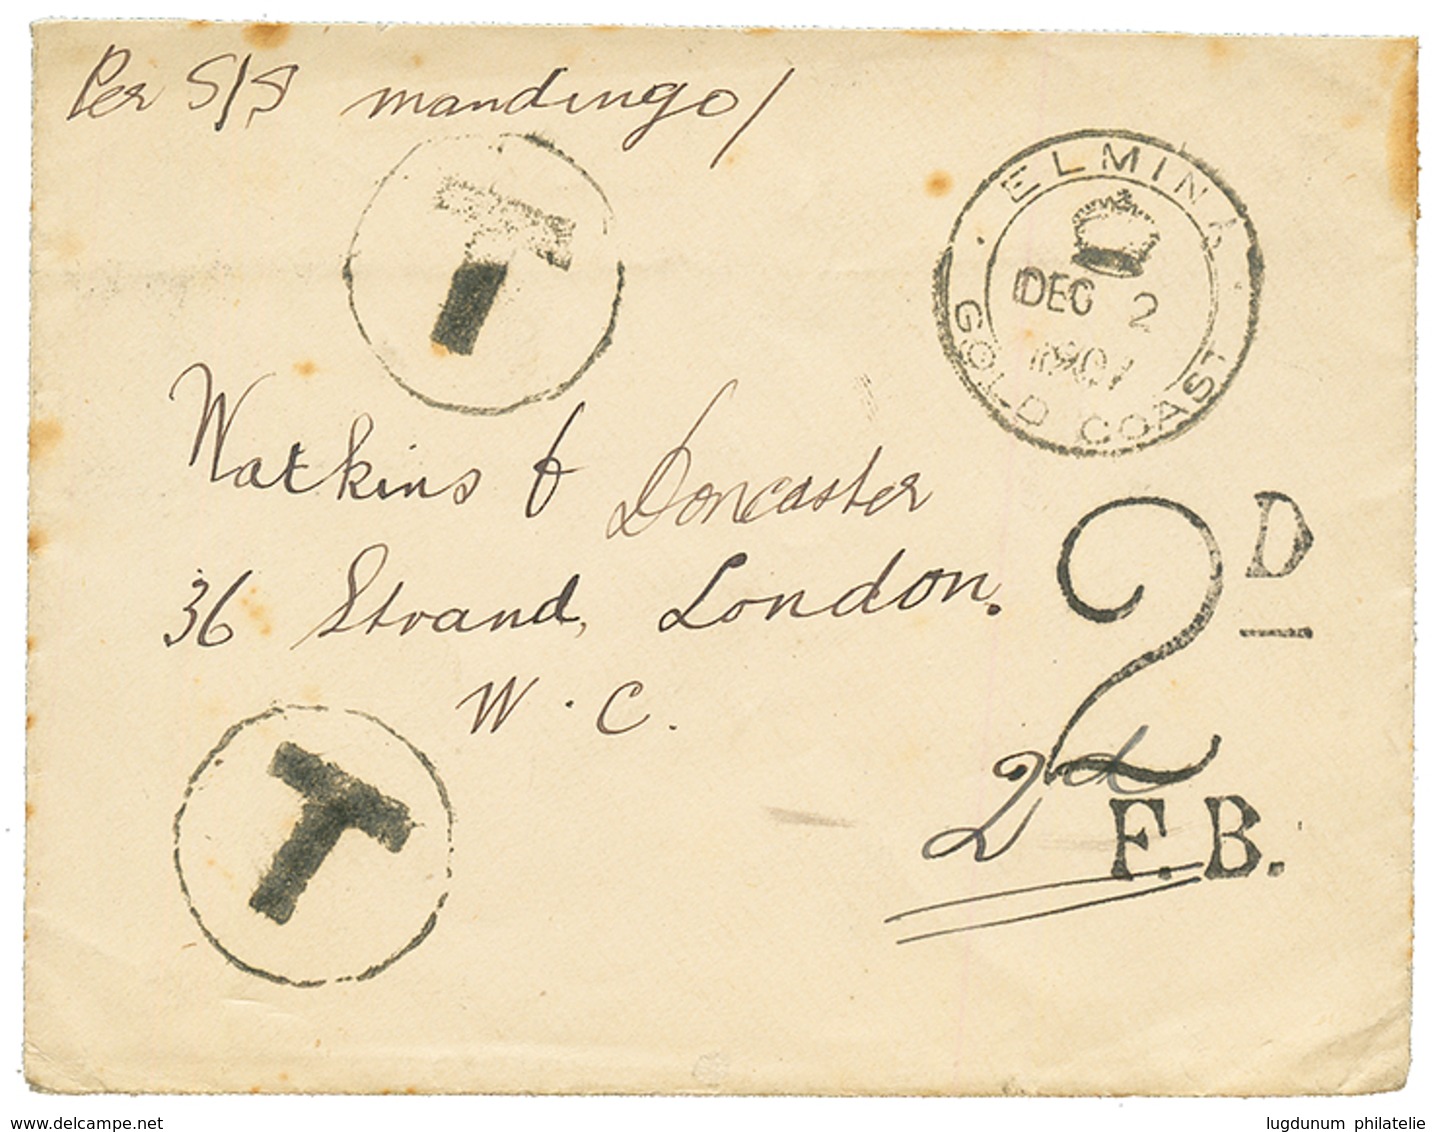 GOLD COAST : 1907 ELMINA GOLD COAST + "T" Tax Marking On Envelope With Full Text To LONDON. Scarce. Vf. - Côte D'Or (...-1957)